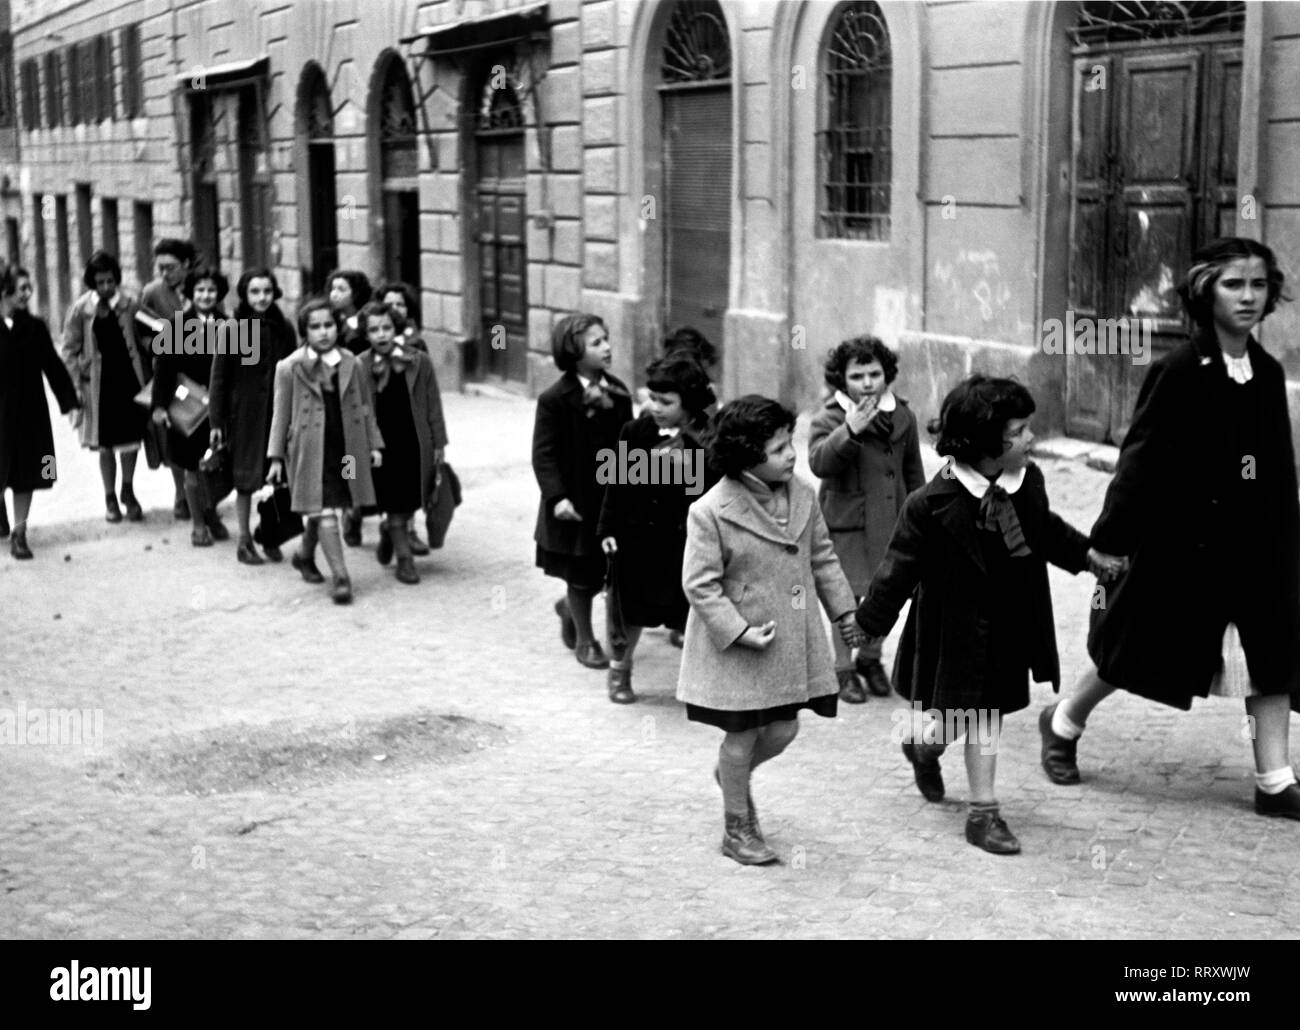 Travel to Rome - Italy - 1950s - children on the way to the school. Kinder auf ihrem Schulweg durch Rom, Italien. Photo Erich Andres Stock Photo